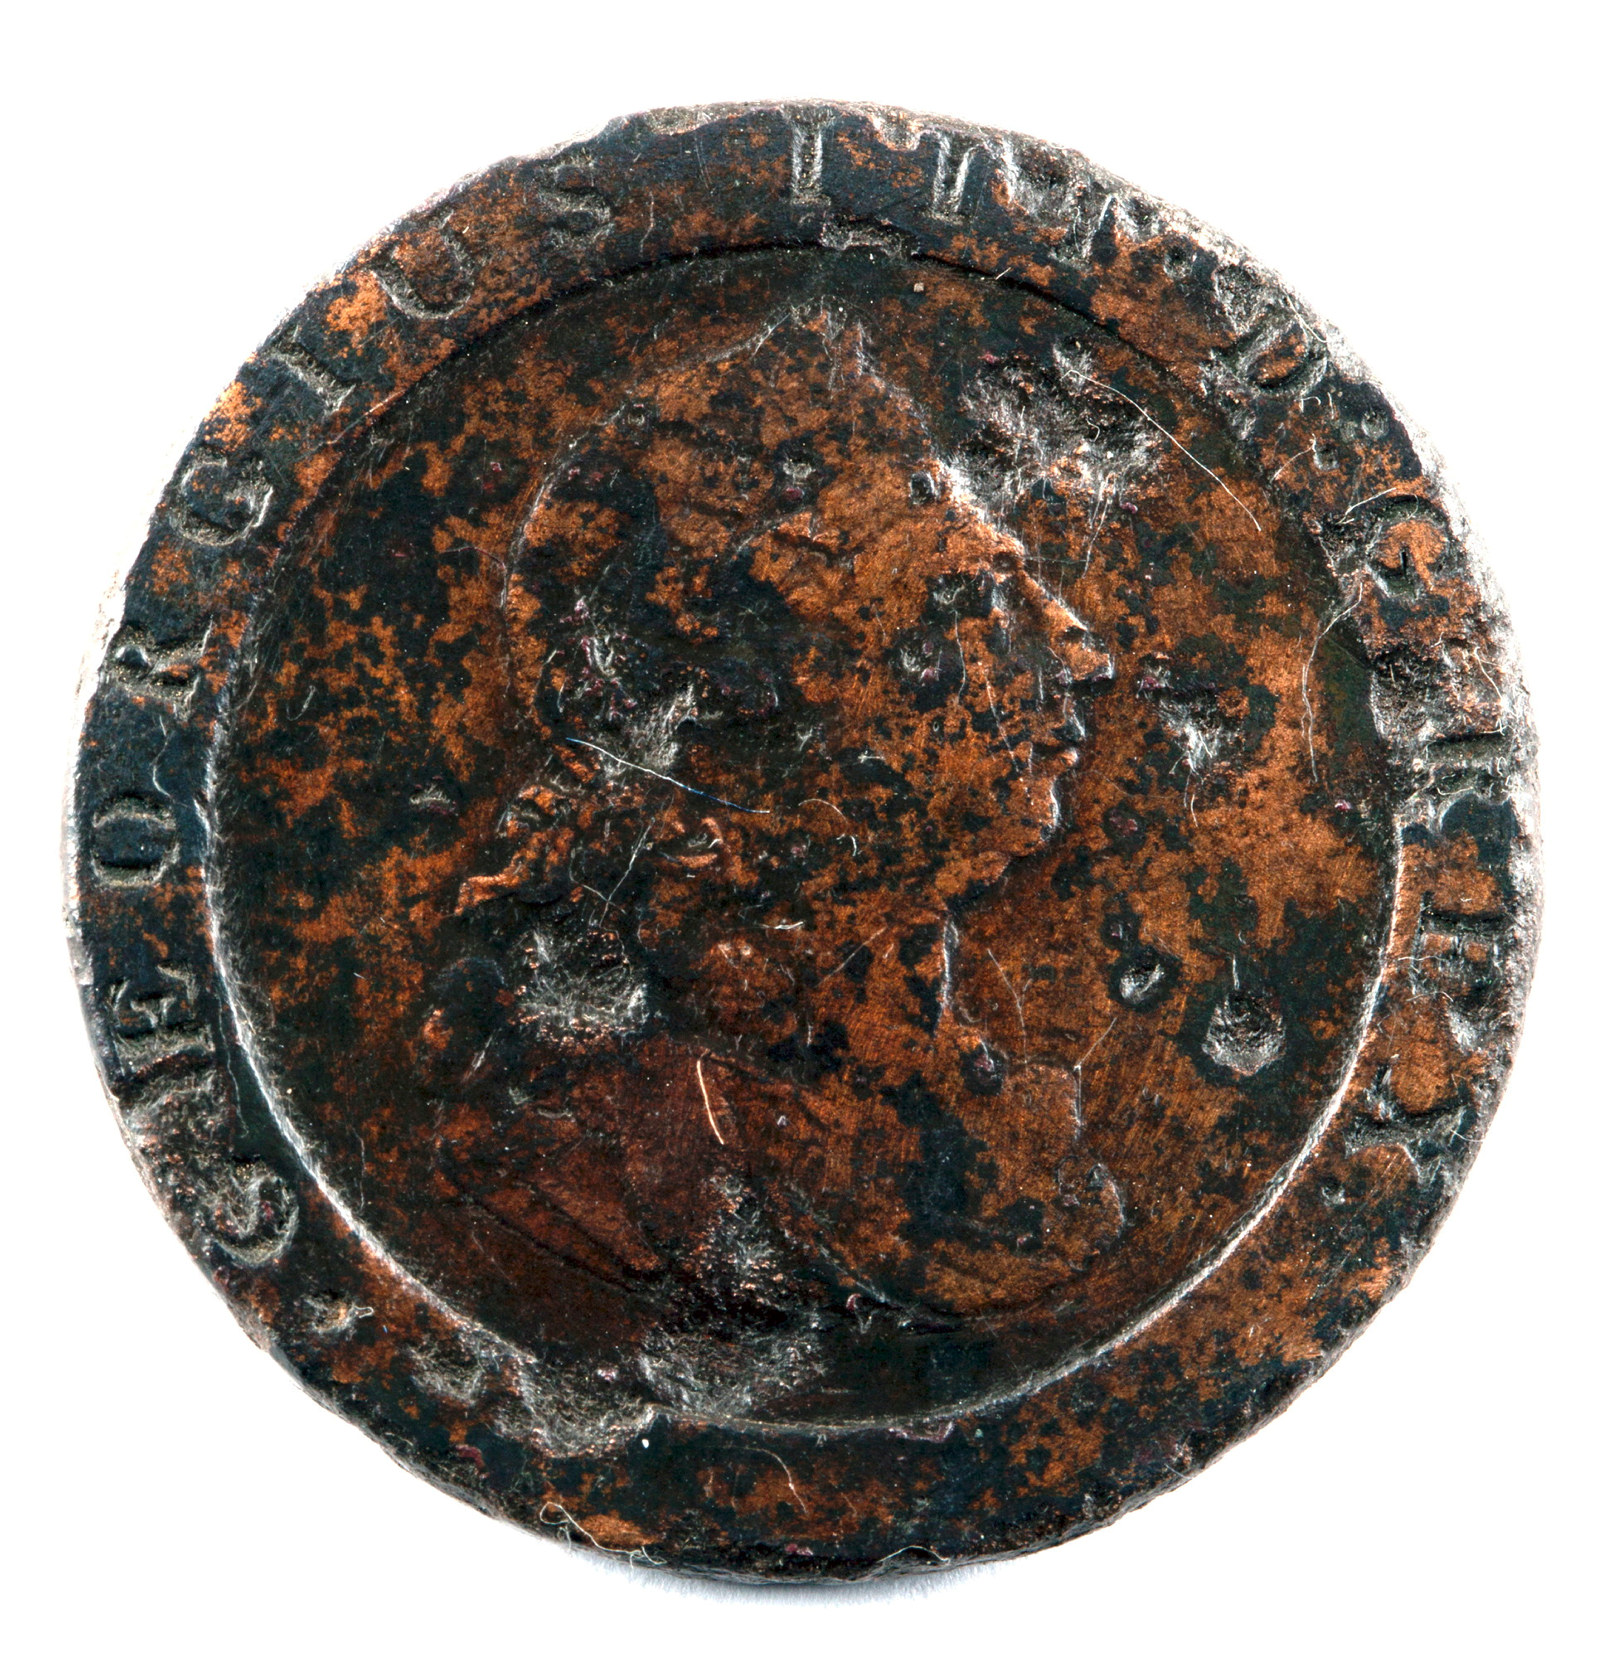 Coin - George III Cartwheel penny 1797, (reverse), excavated from beneath the ground floor of Hyde Park Barracks